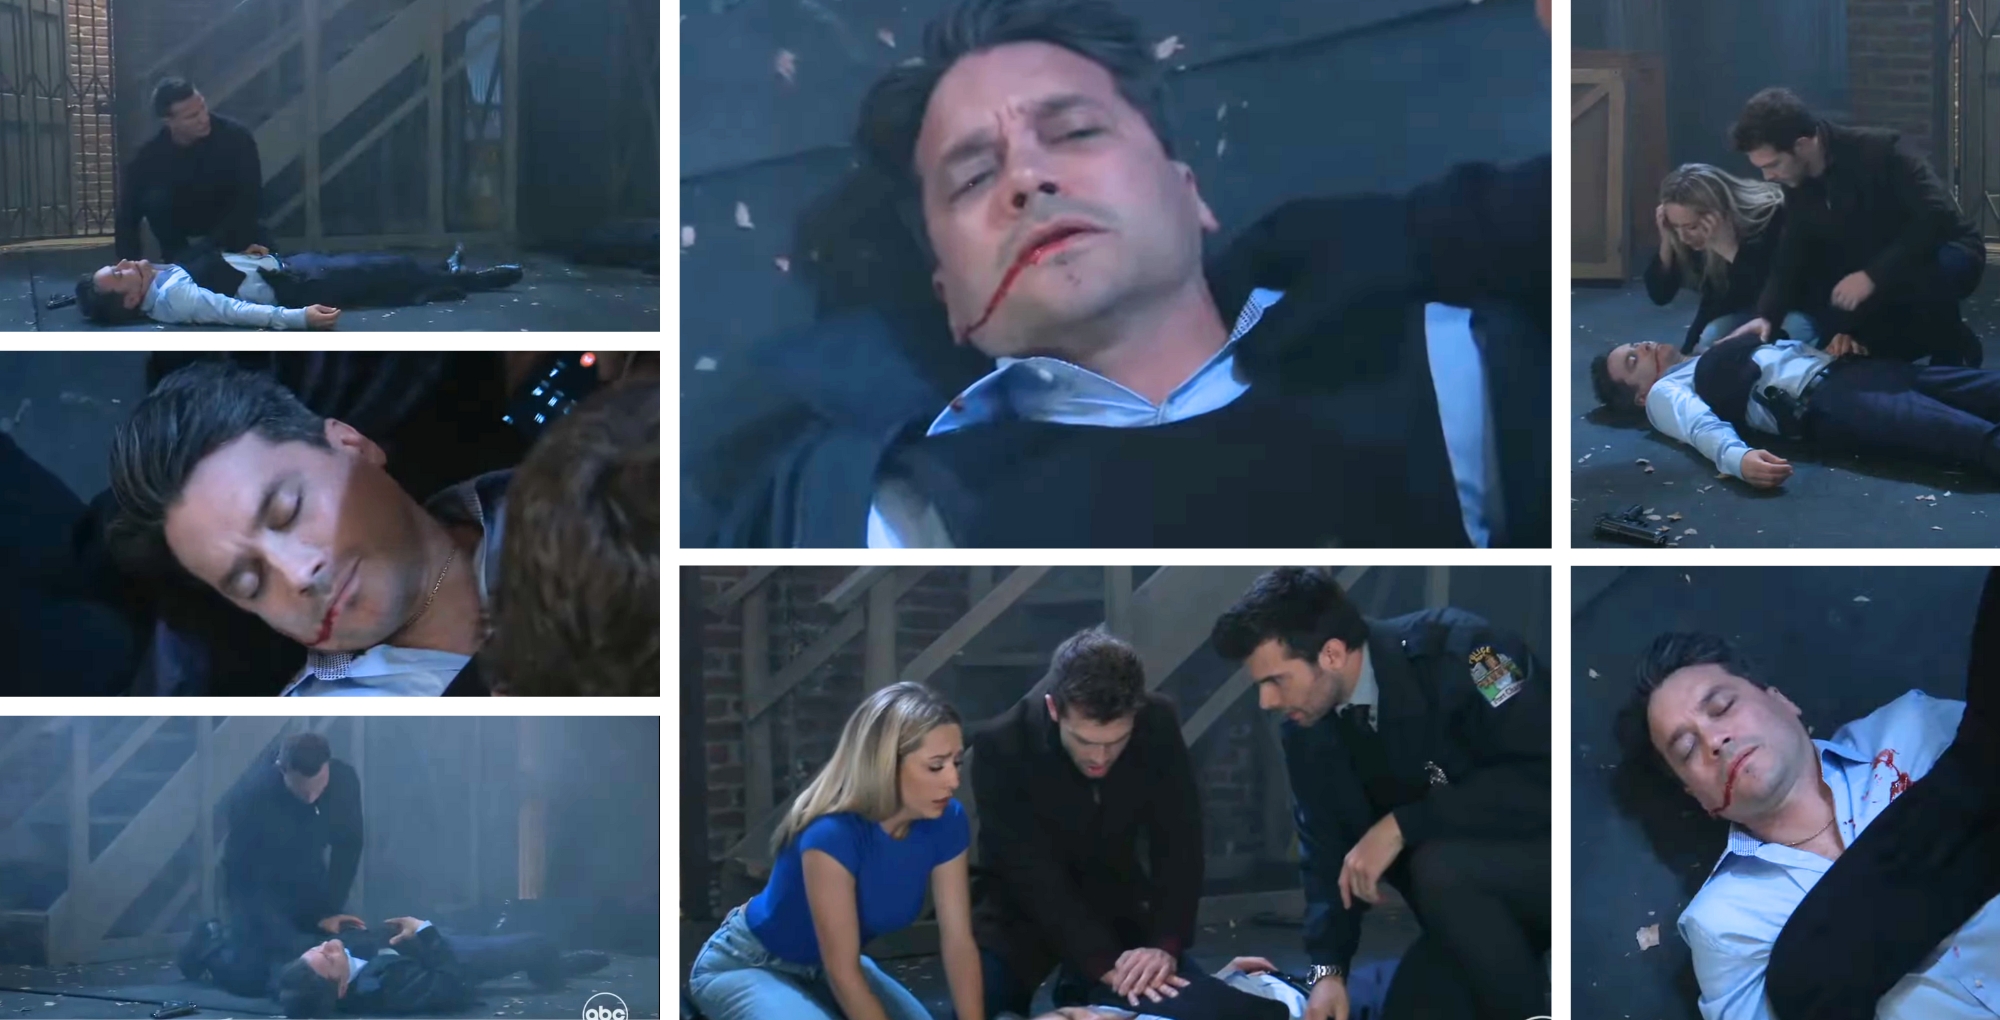 general hospital screenshots for episode tuesday, march 5 dante shot laying on ground at waterfront collage, dante, jason, joss, dex